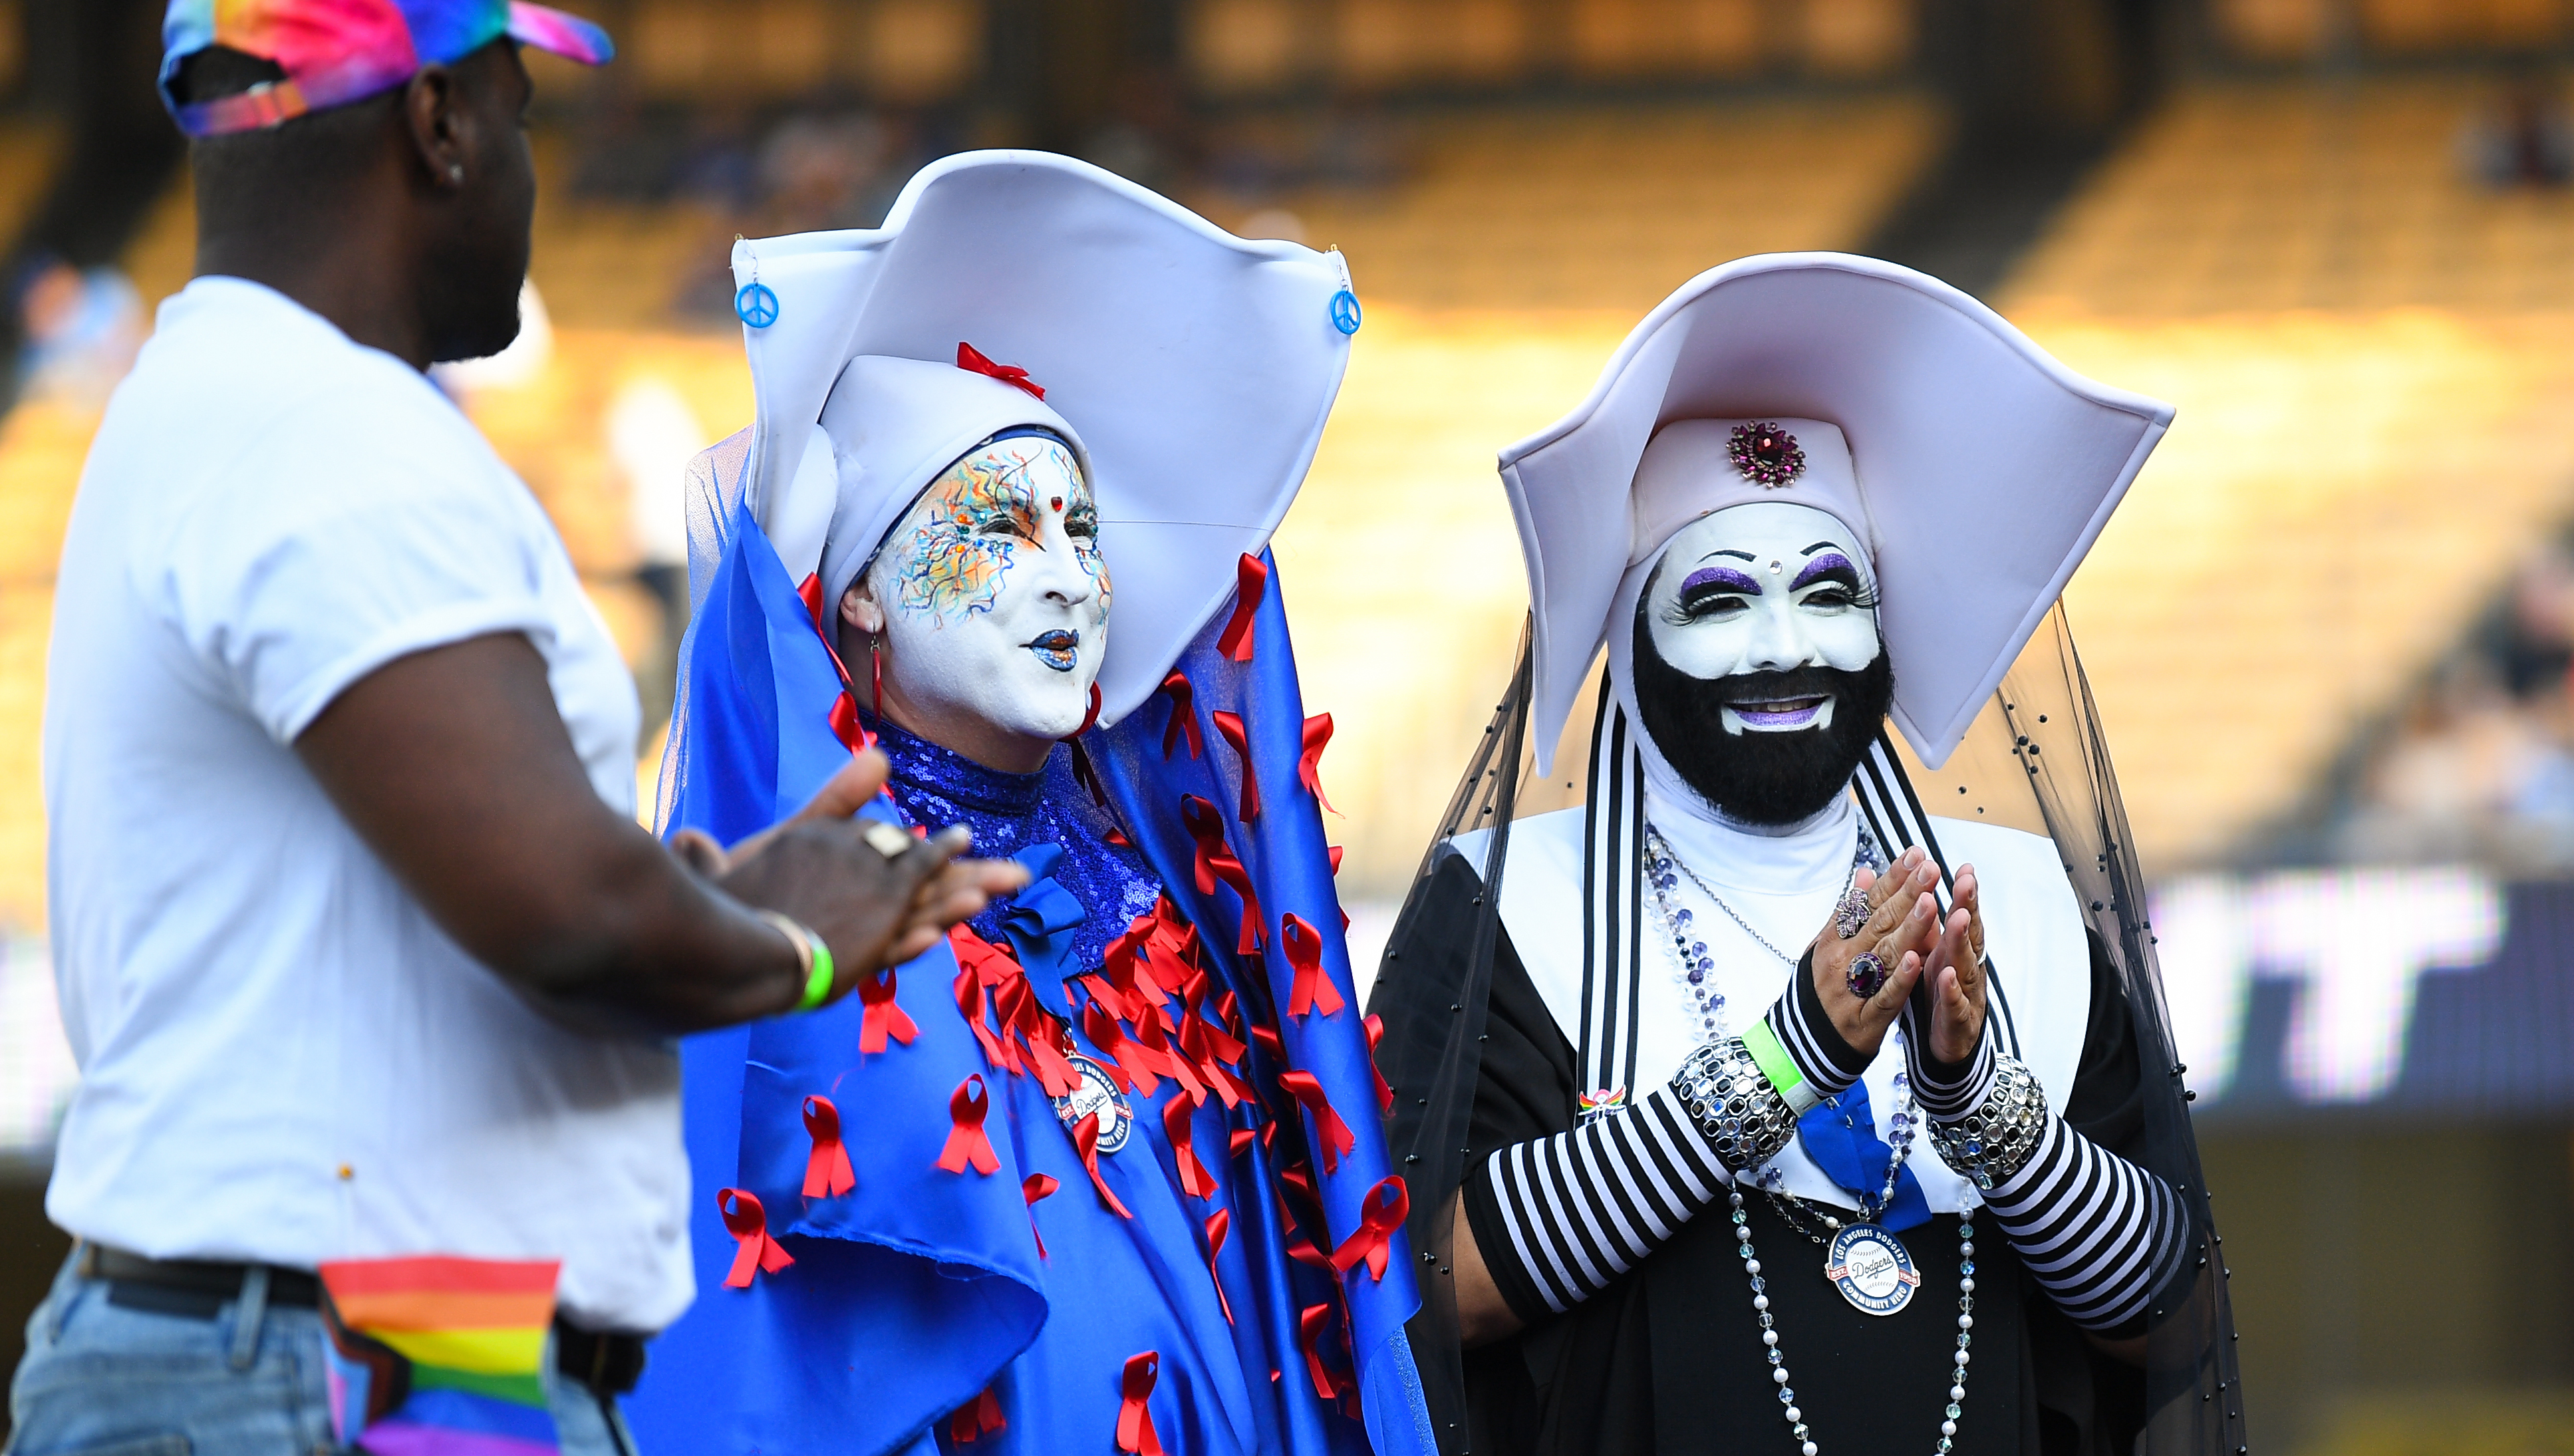 Following the Sisters of Perpetual Indulgence to Dodgers Pride